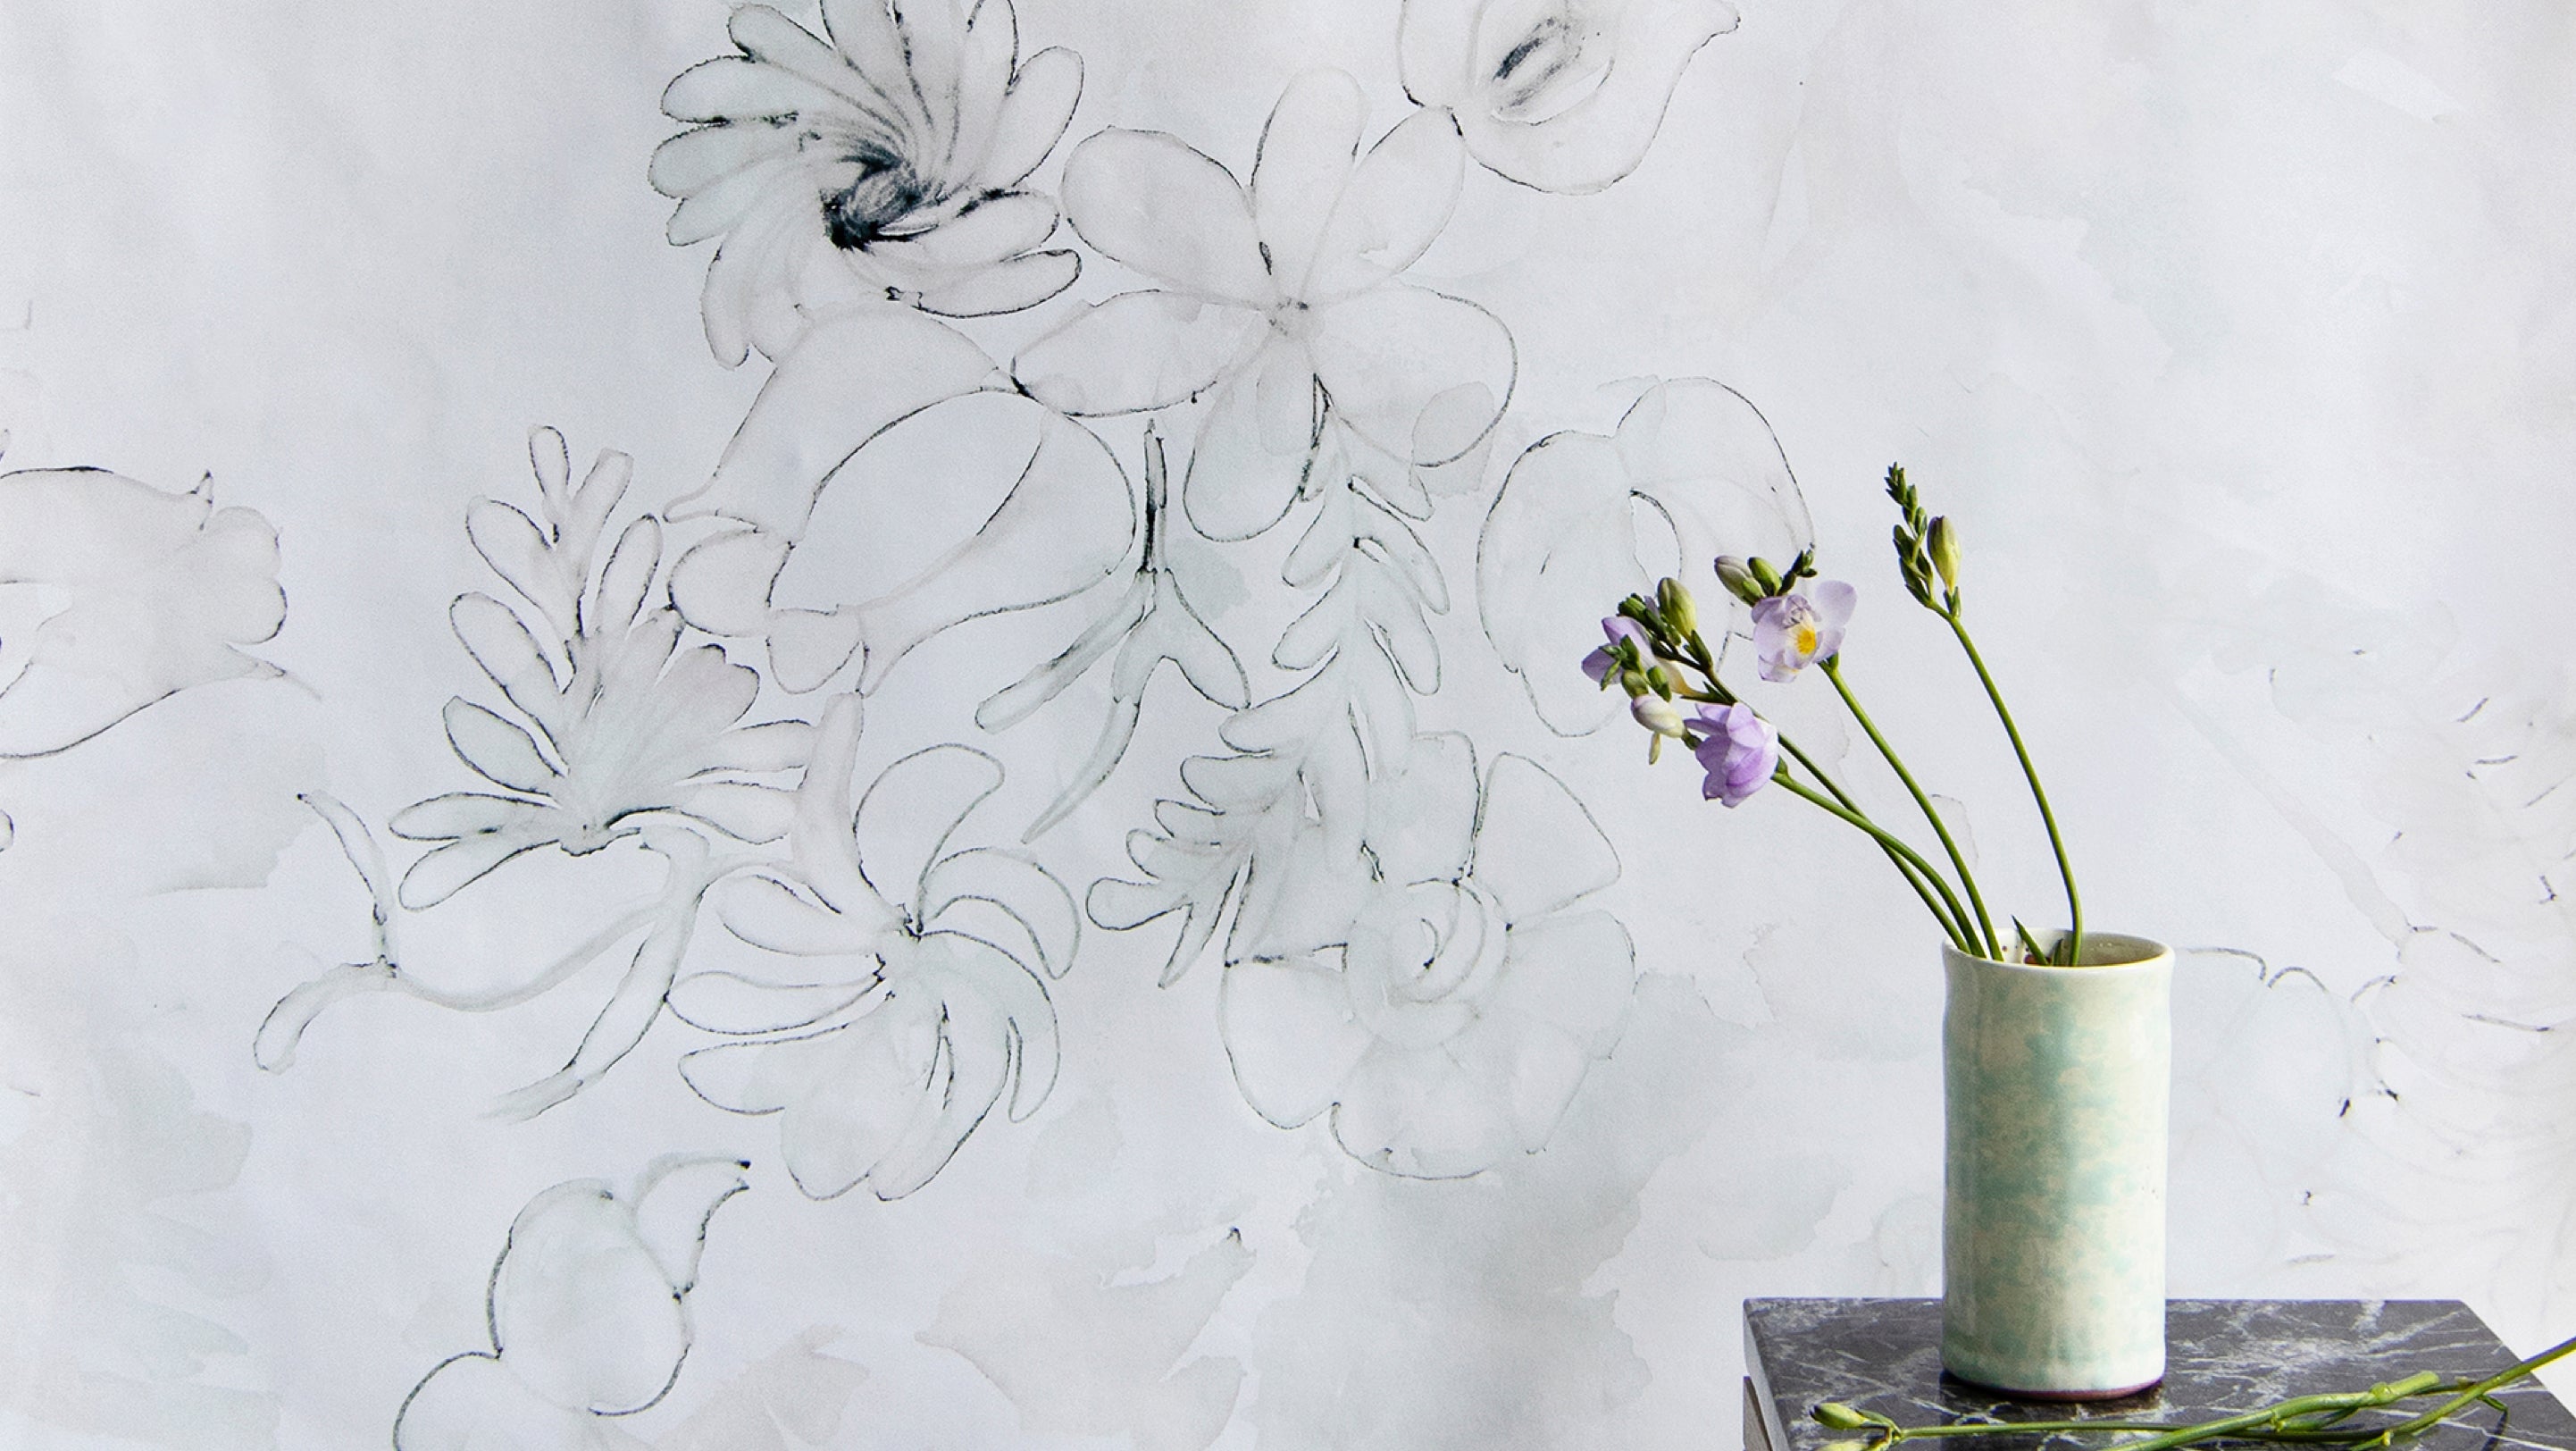 A vase with flowers on it in front of a wall with wallpaper